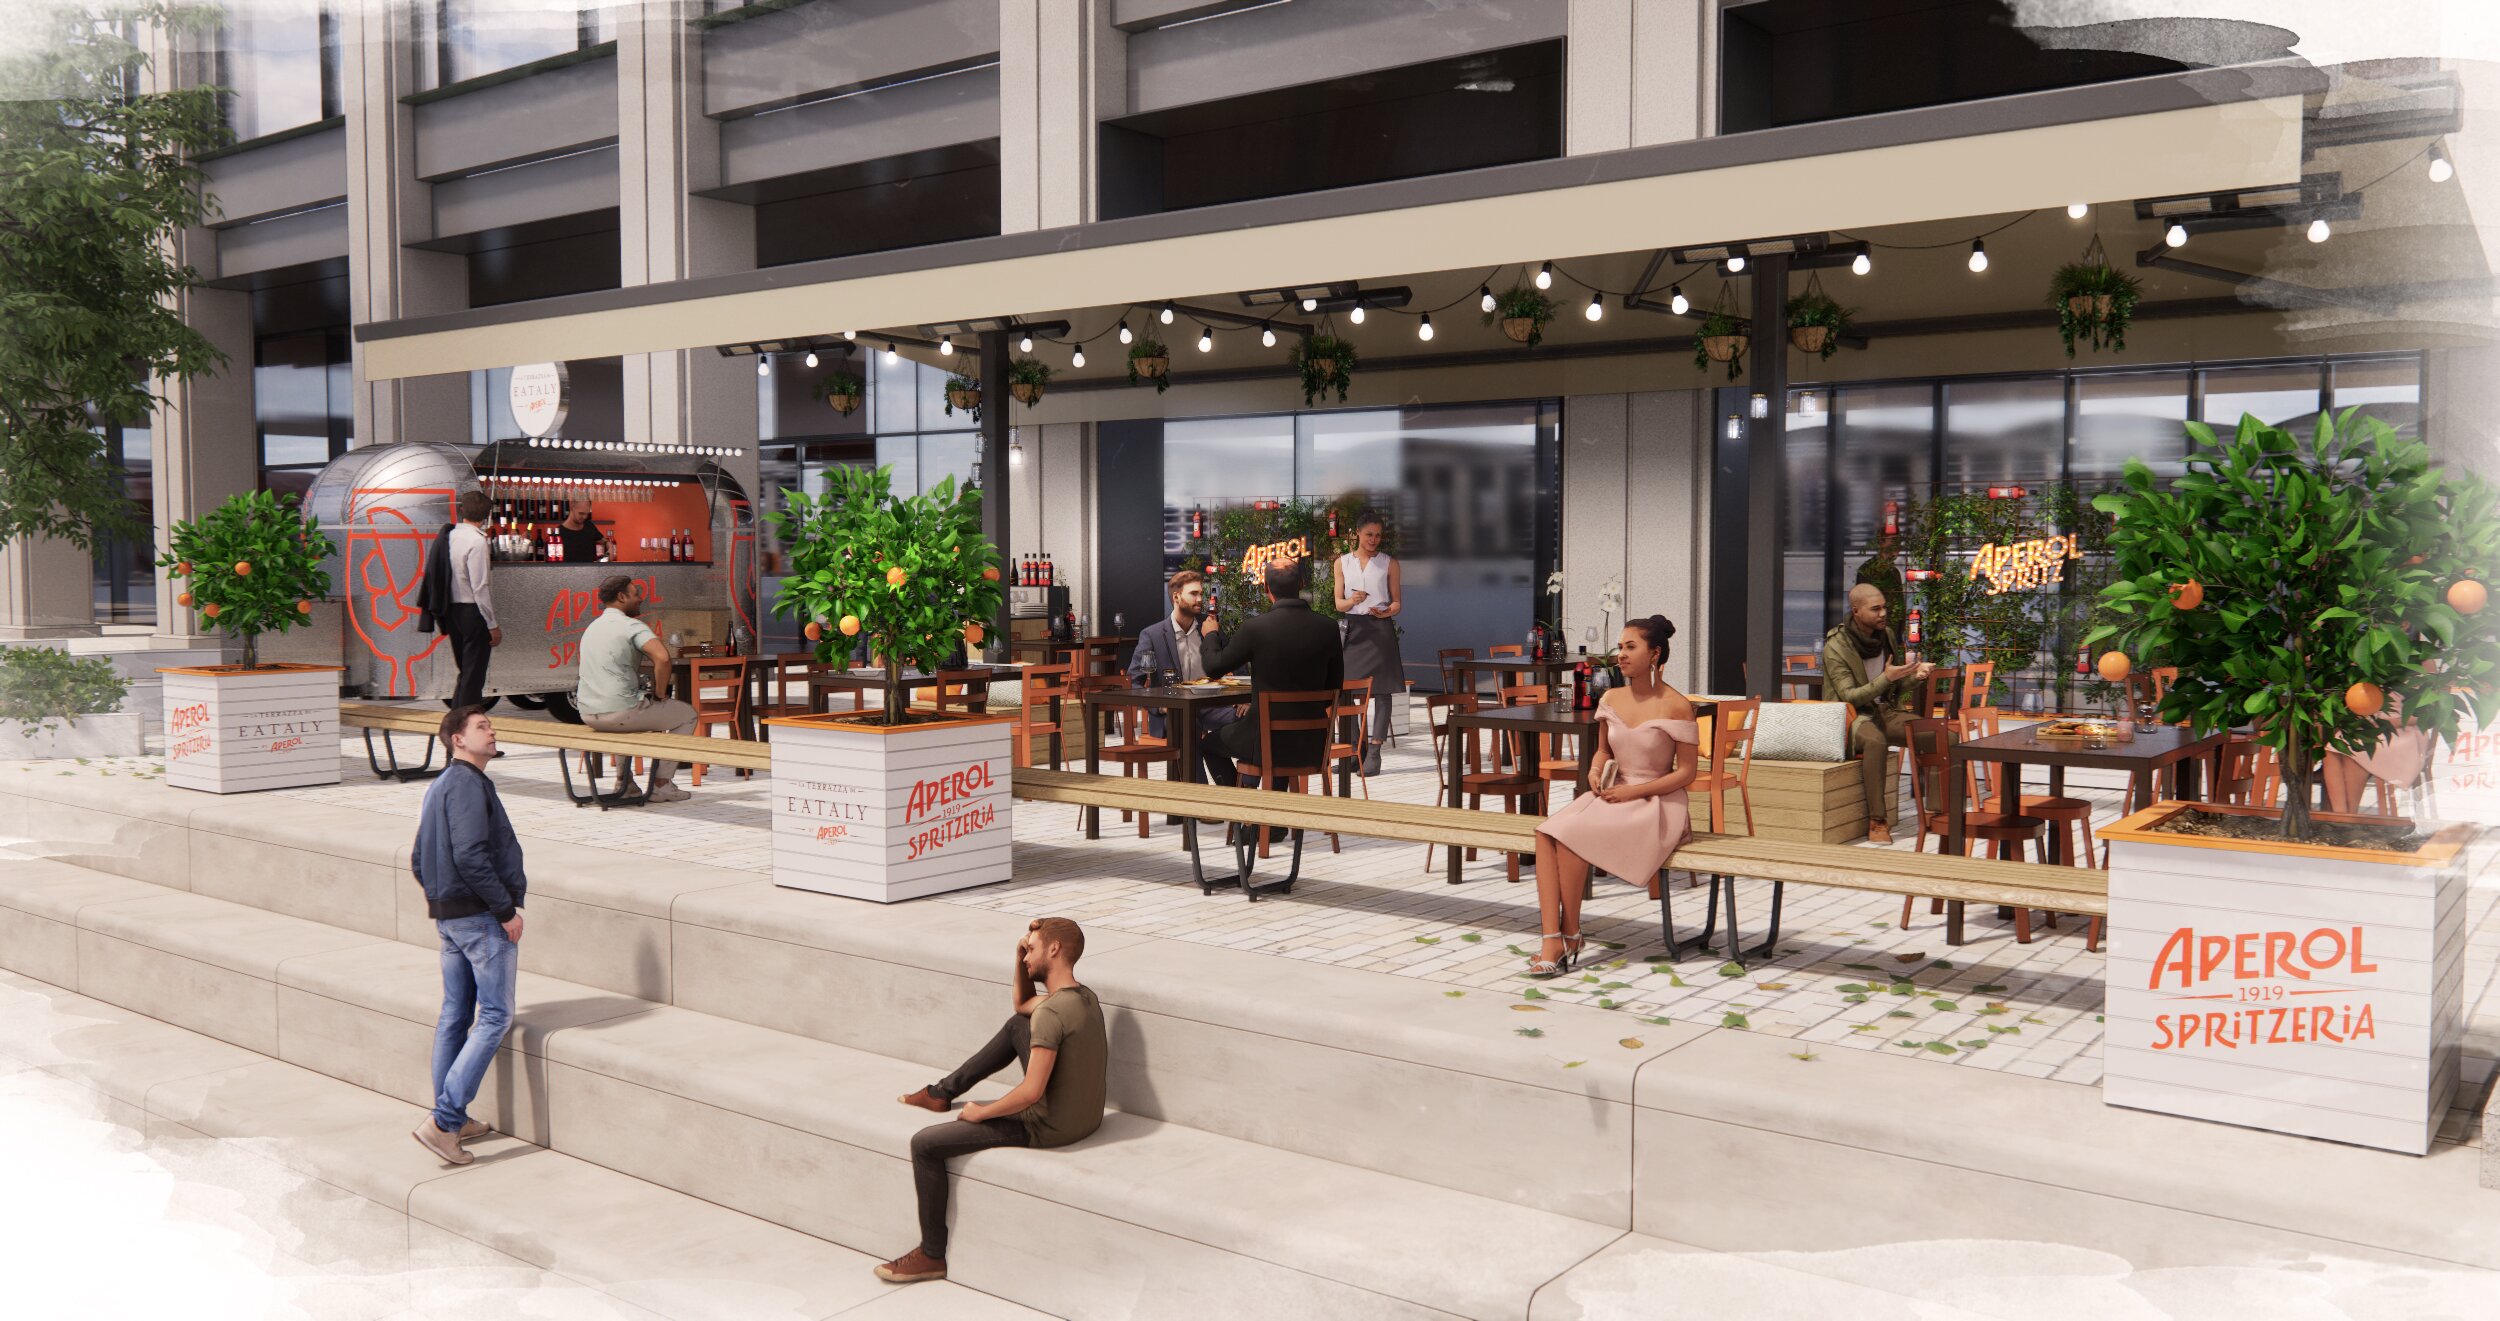 Eataly confirms opening of huge London food hall this month